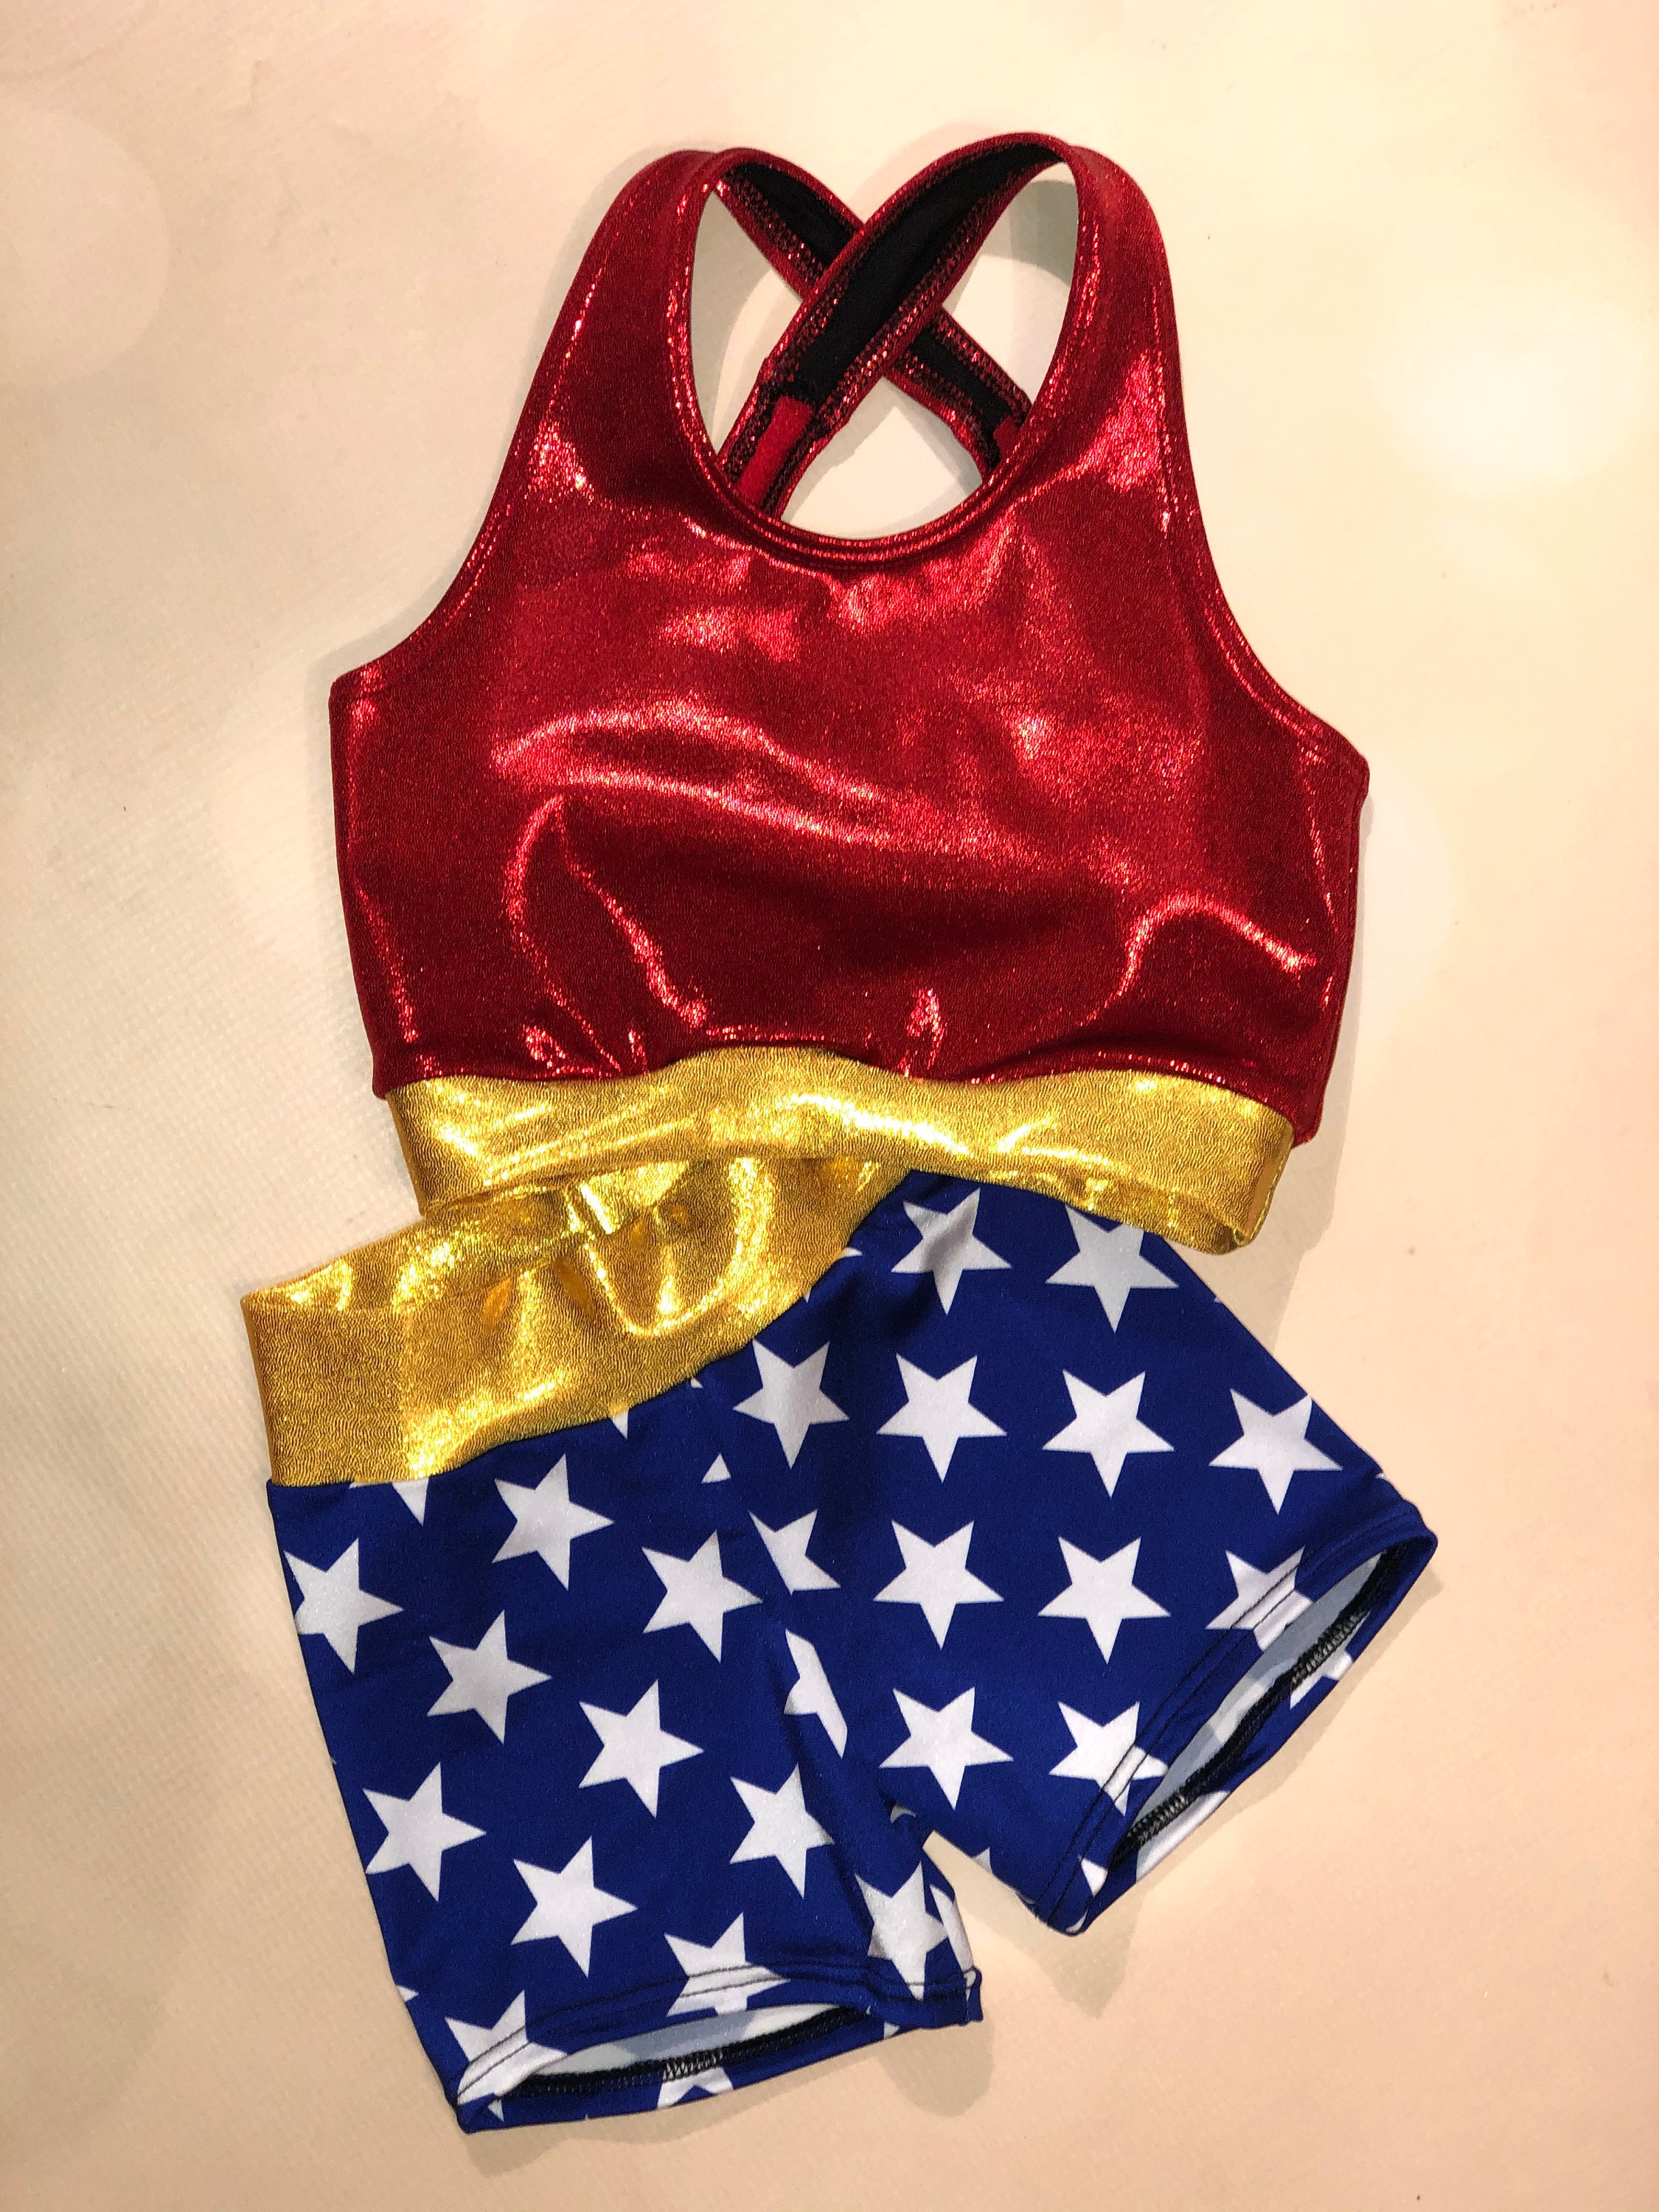 The bailey Sports Bra, Spandex Short, Optional Matching Cheer Bow